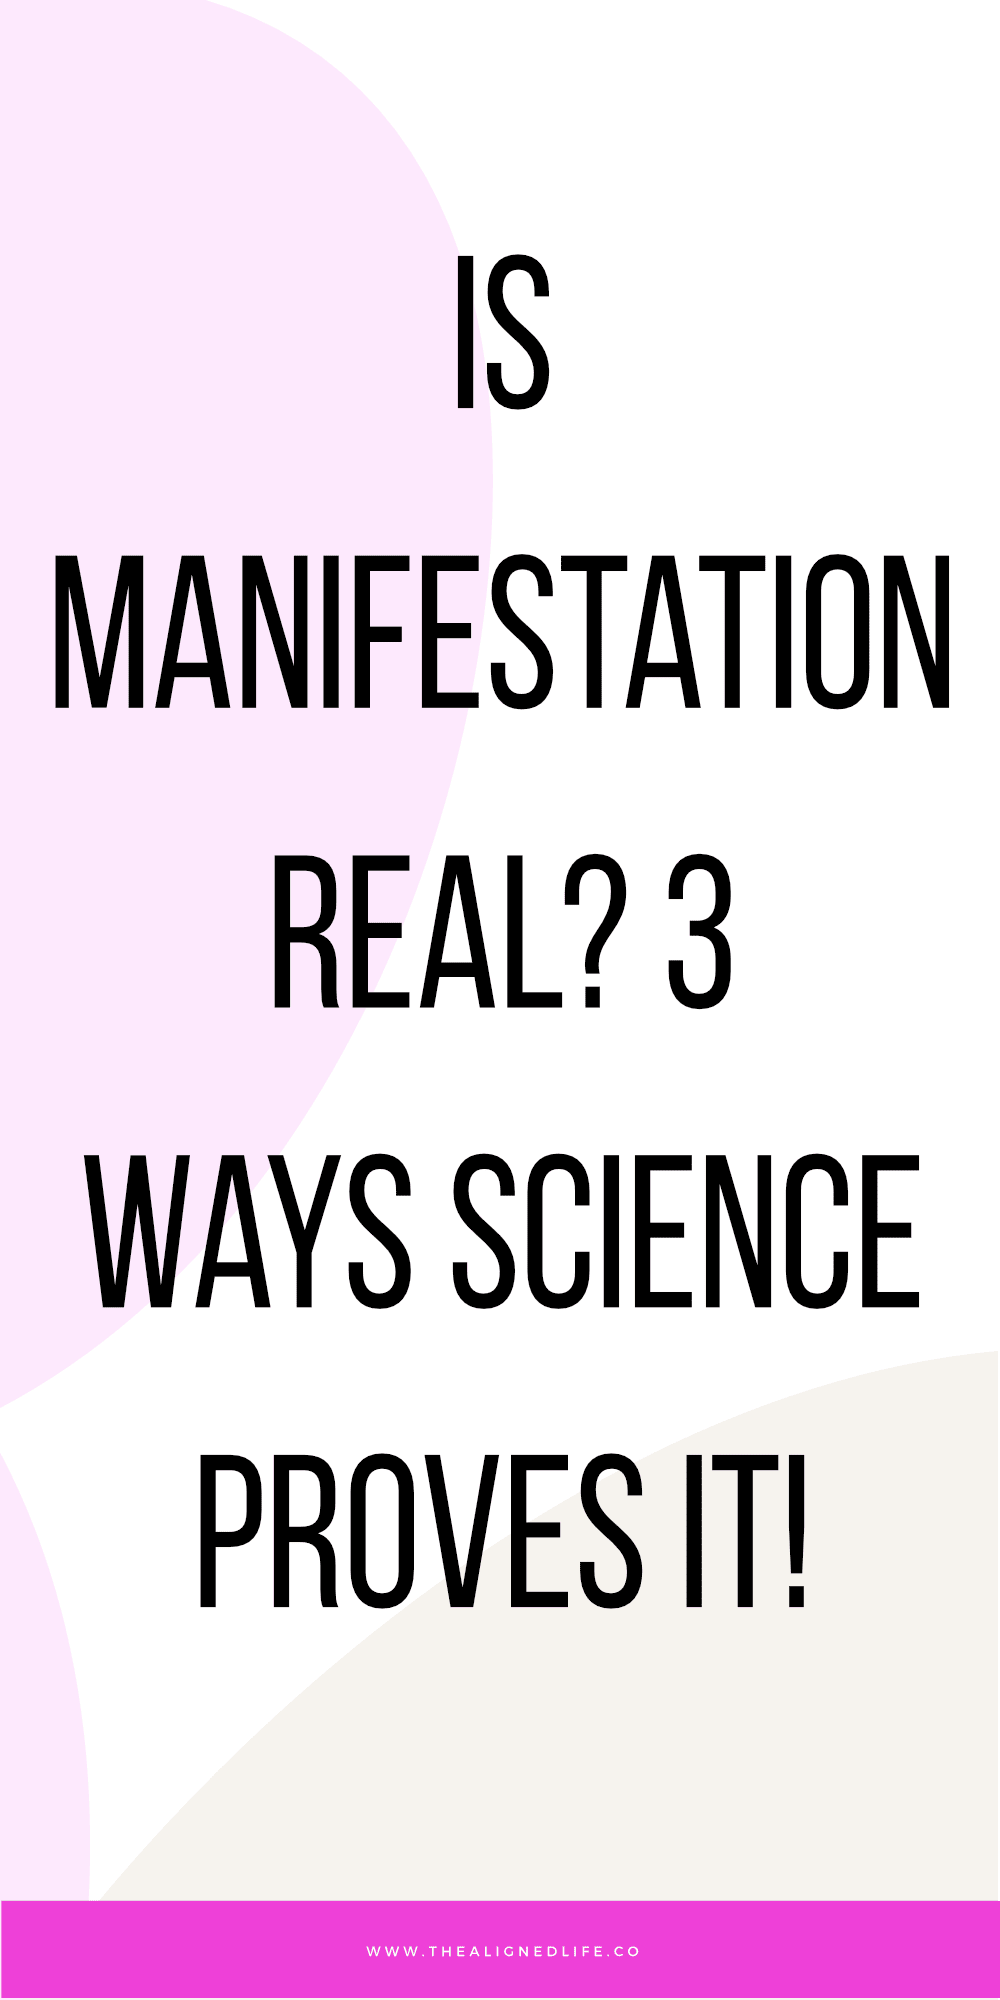 Is Manifestation Real? 3 Ways It's Proven By Science!